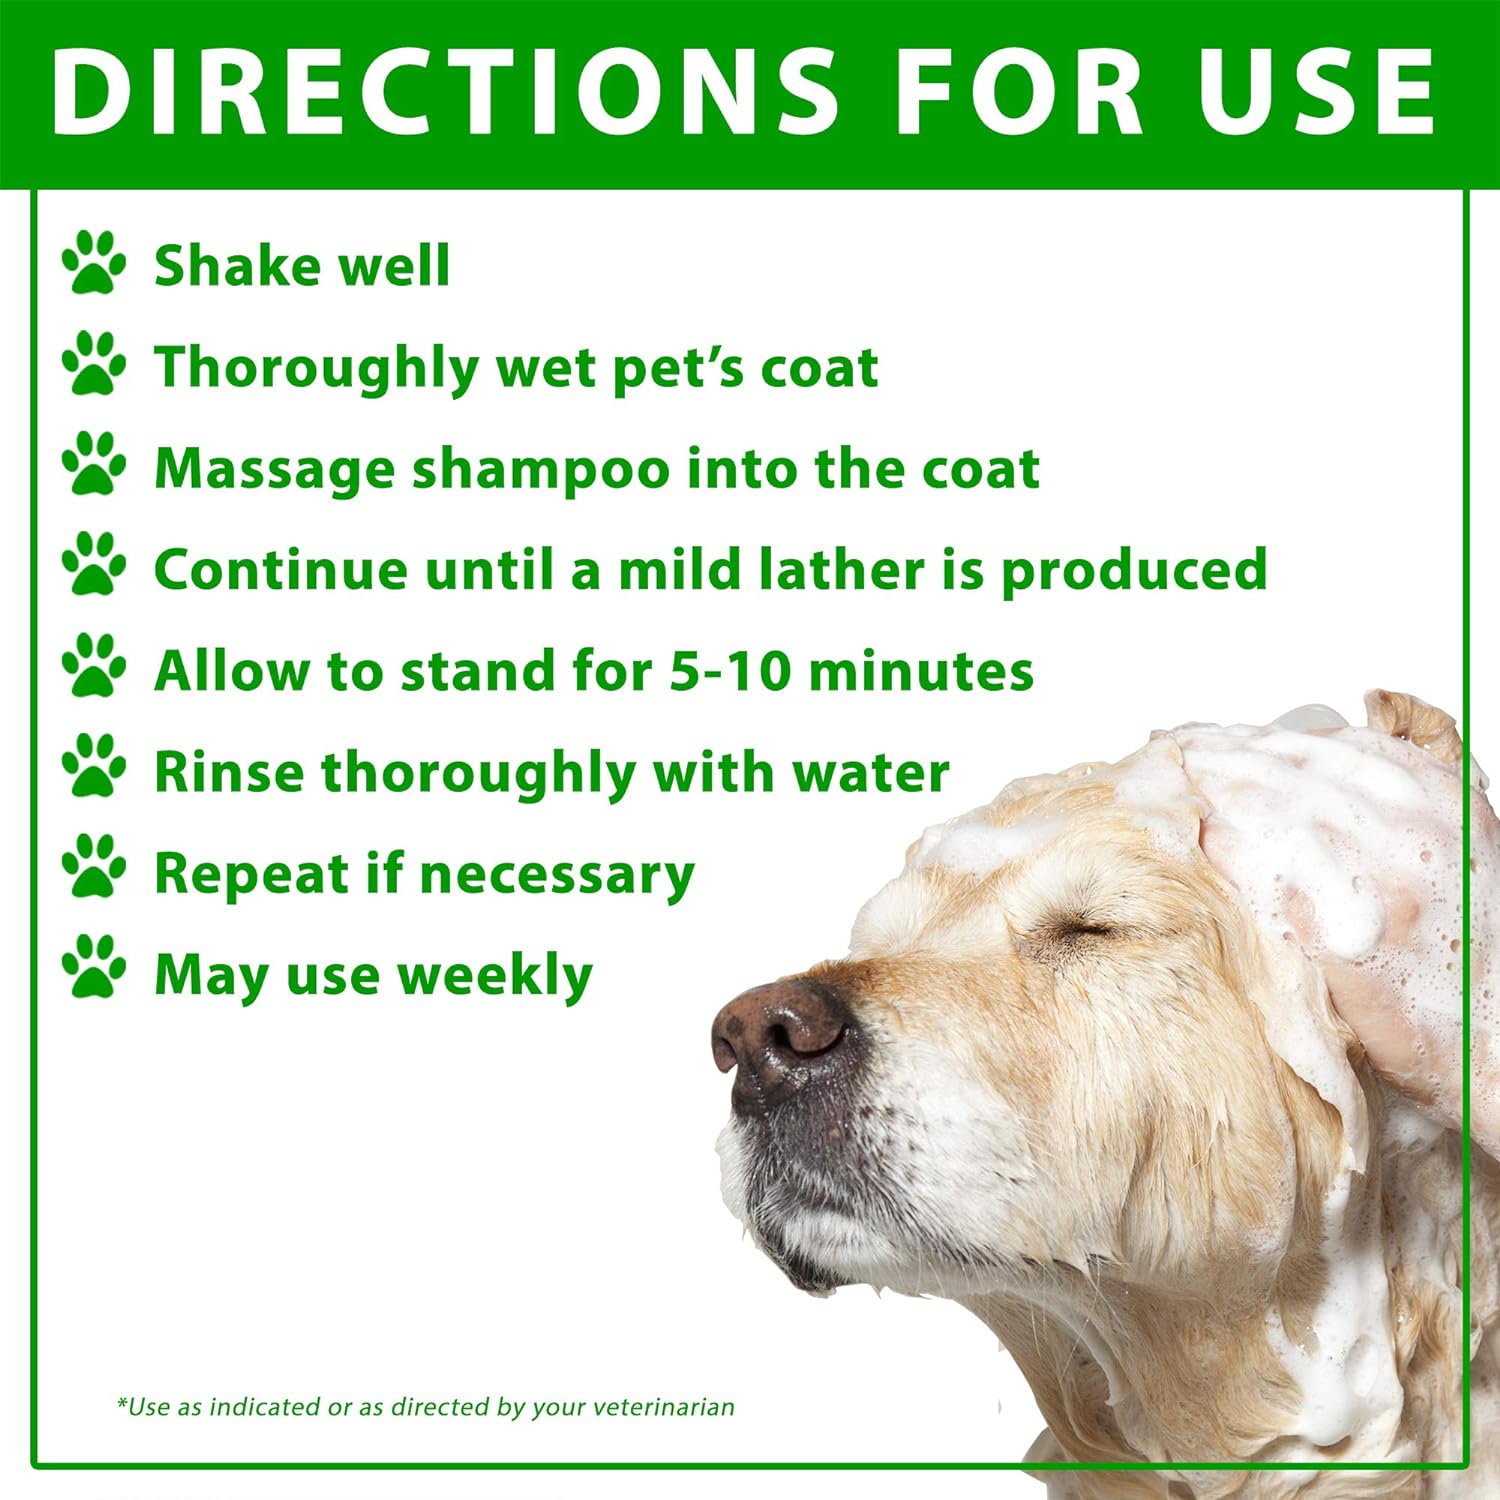 Benzoyl Peroxide Shampoo For Dogs : Vetoquinol BPO-3 Shampoo for Dogs, Cats & Horses (3% Benzoyl Peroxide) – 16oz – Deep Cleaning, Medicated Shampoo Opens & Flushes Hair Follicles – Degreases Oily Coats – Soothes Red, Flaky, Itchy Skin